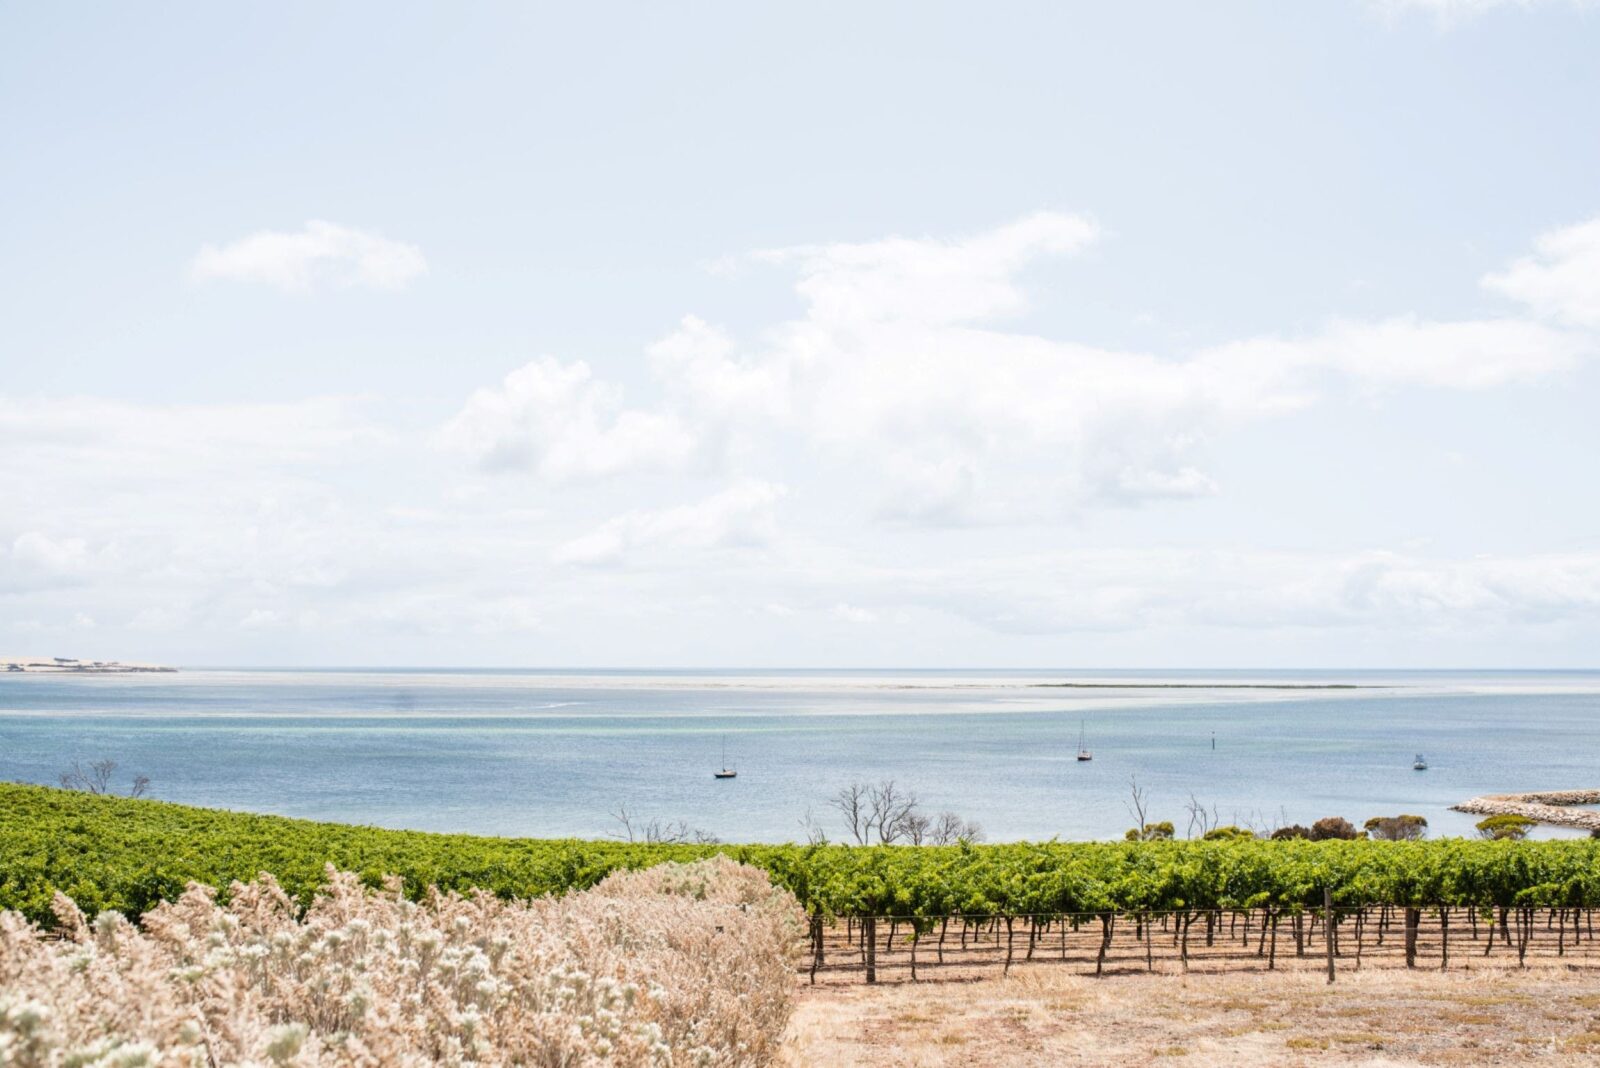 View out to Bay of Shoals over vines in foreground.